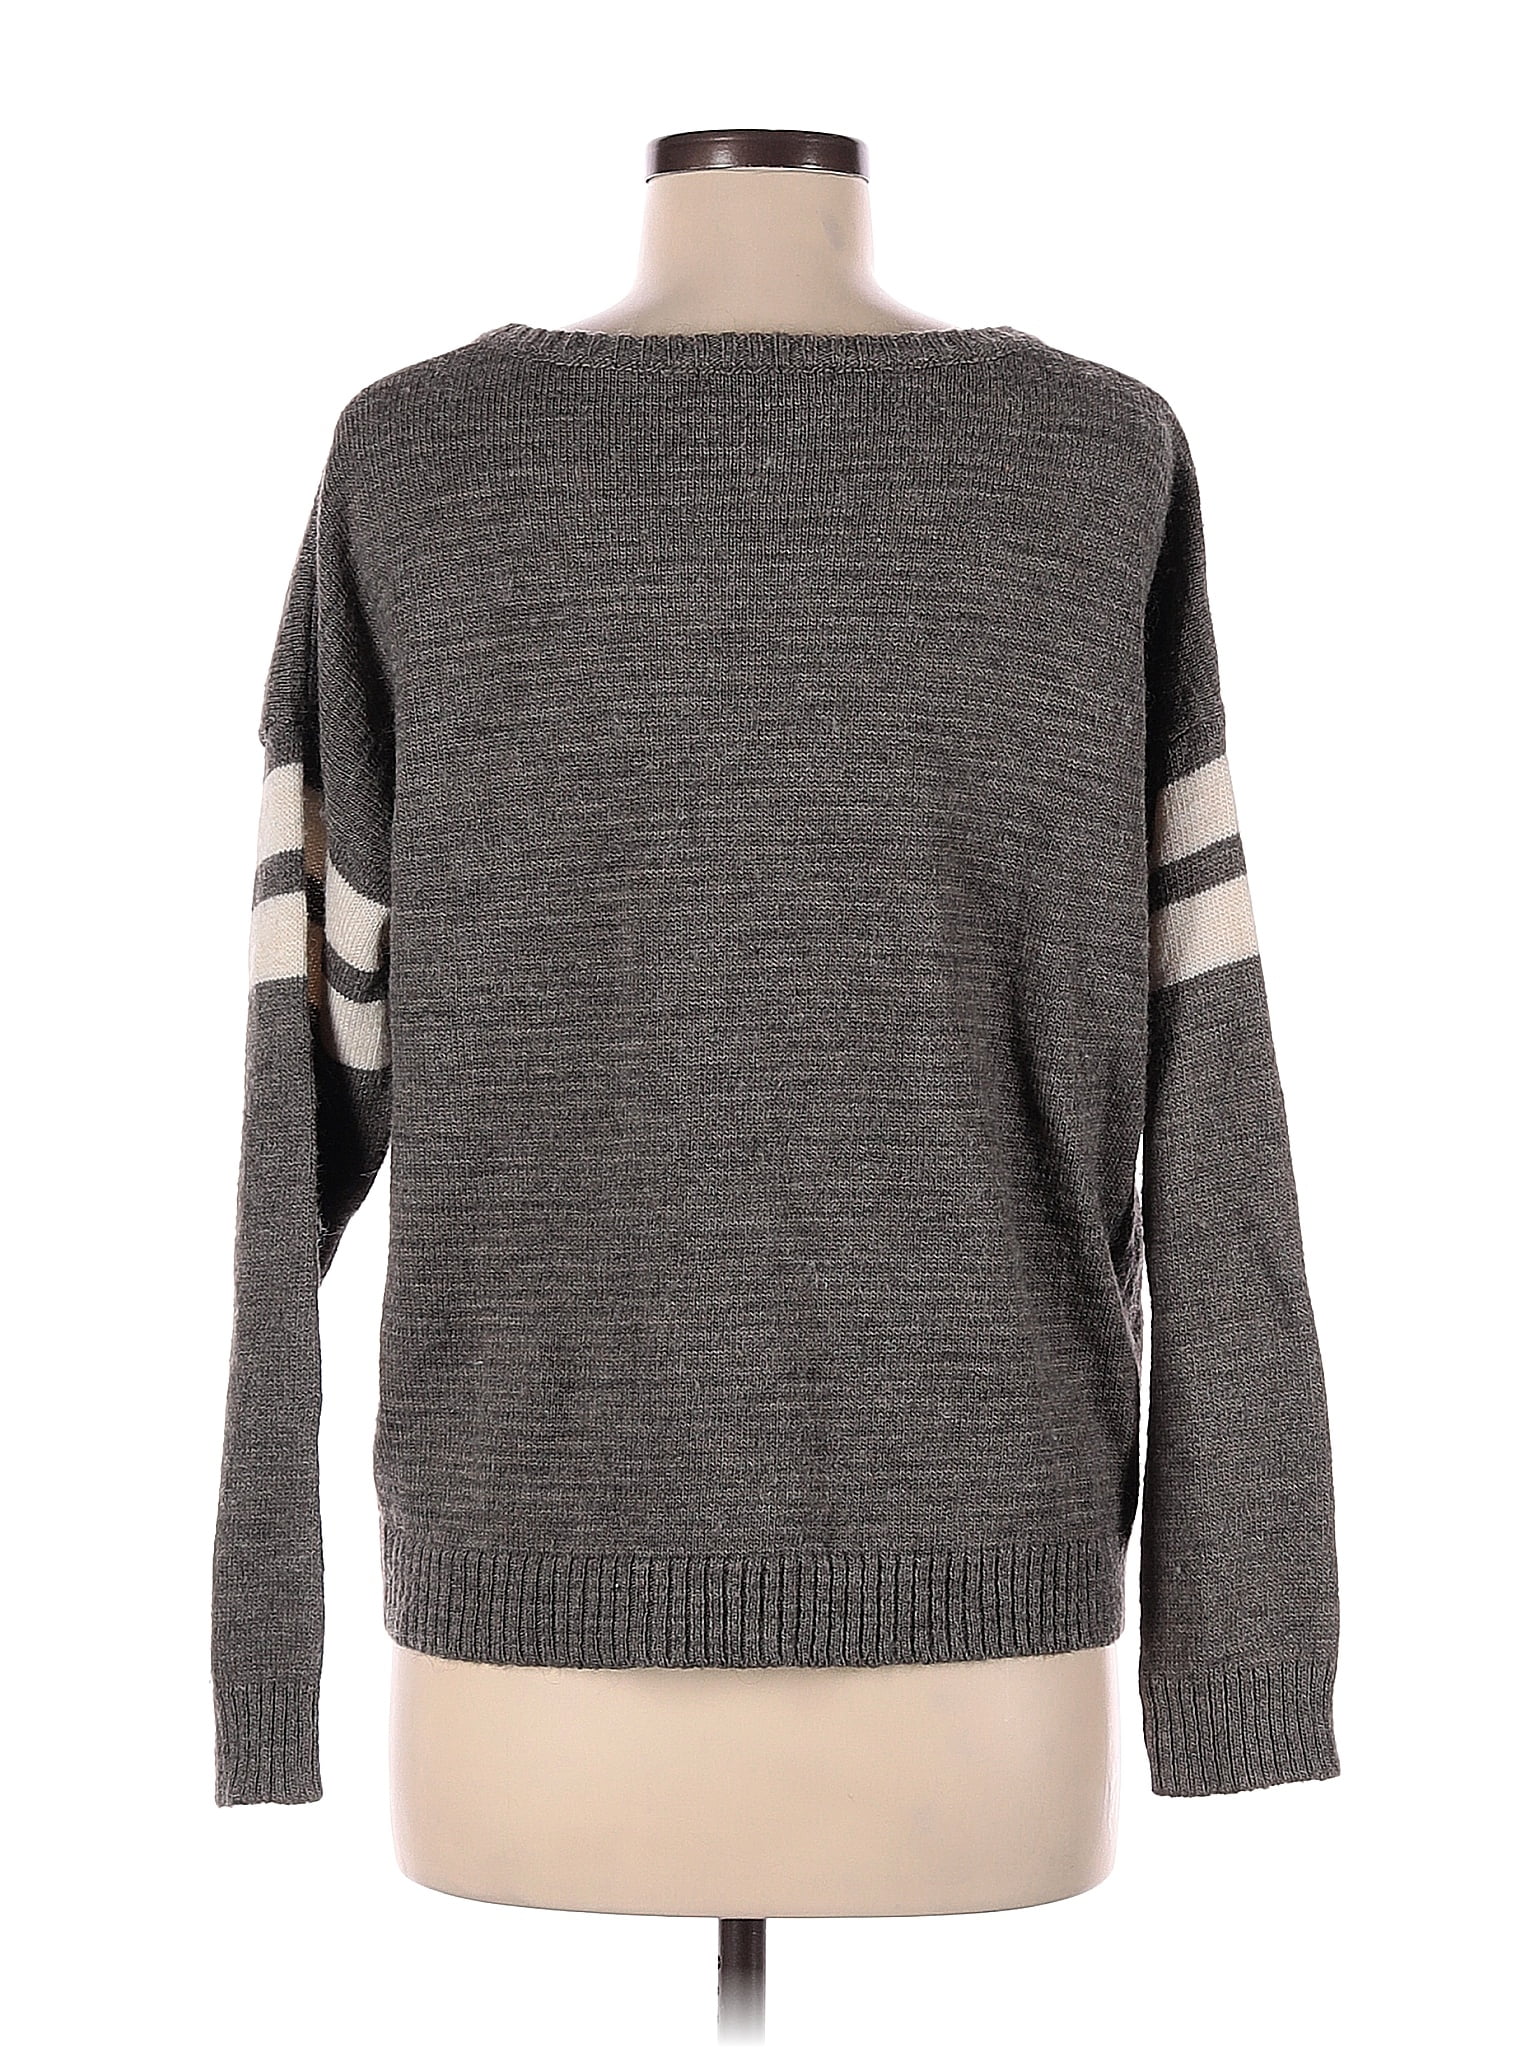 Brandy Melville Color Block Marled Gray Wool Cardigan One Size - 63% off